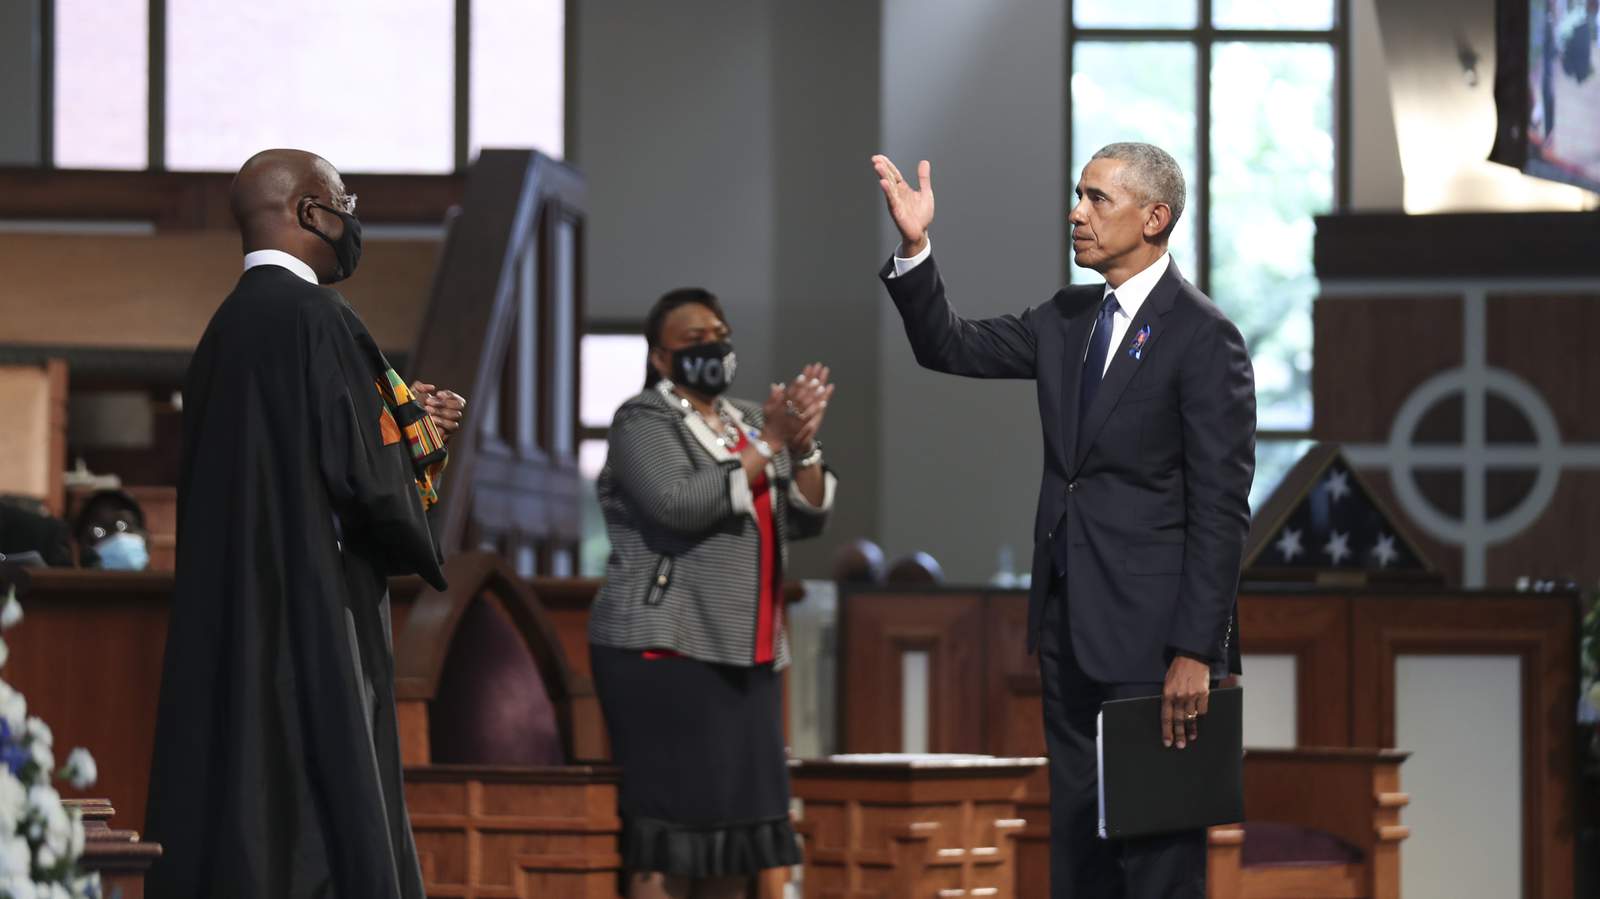 At Lewis funeral, Obama calls for renewing Voting Rights Act